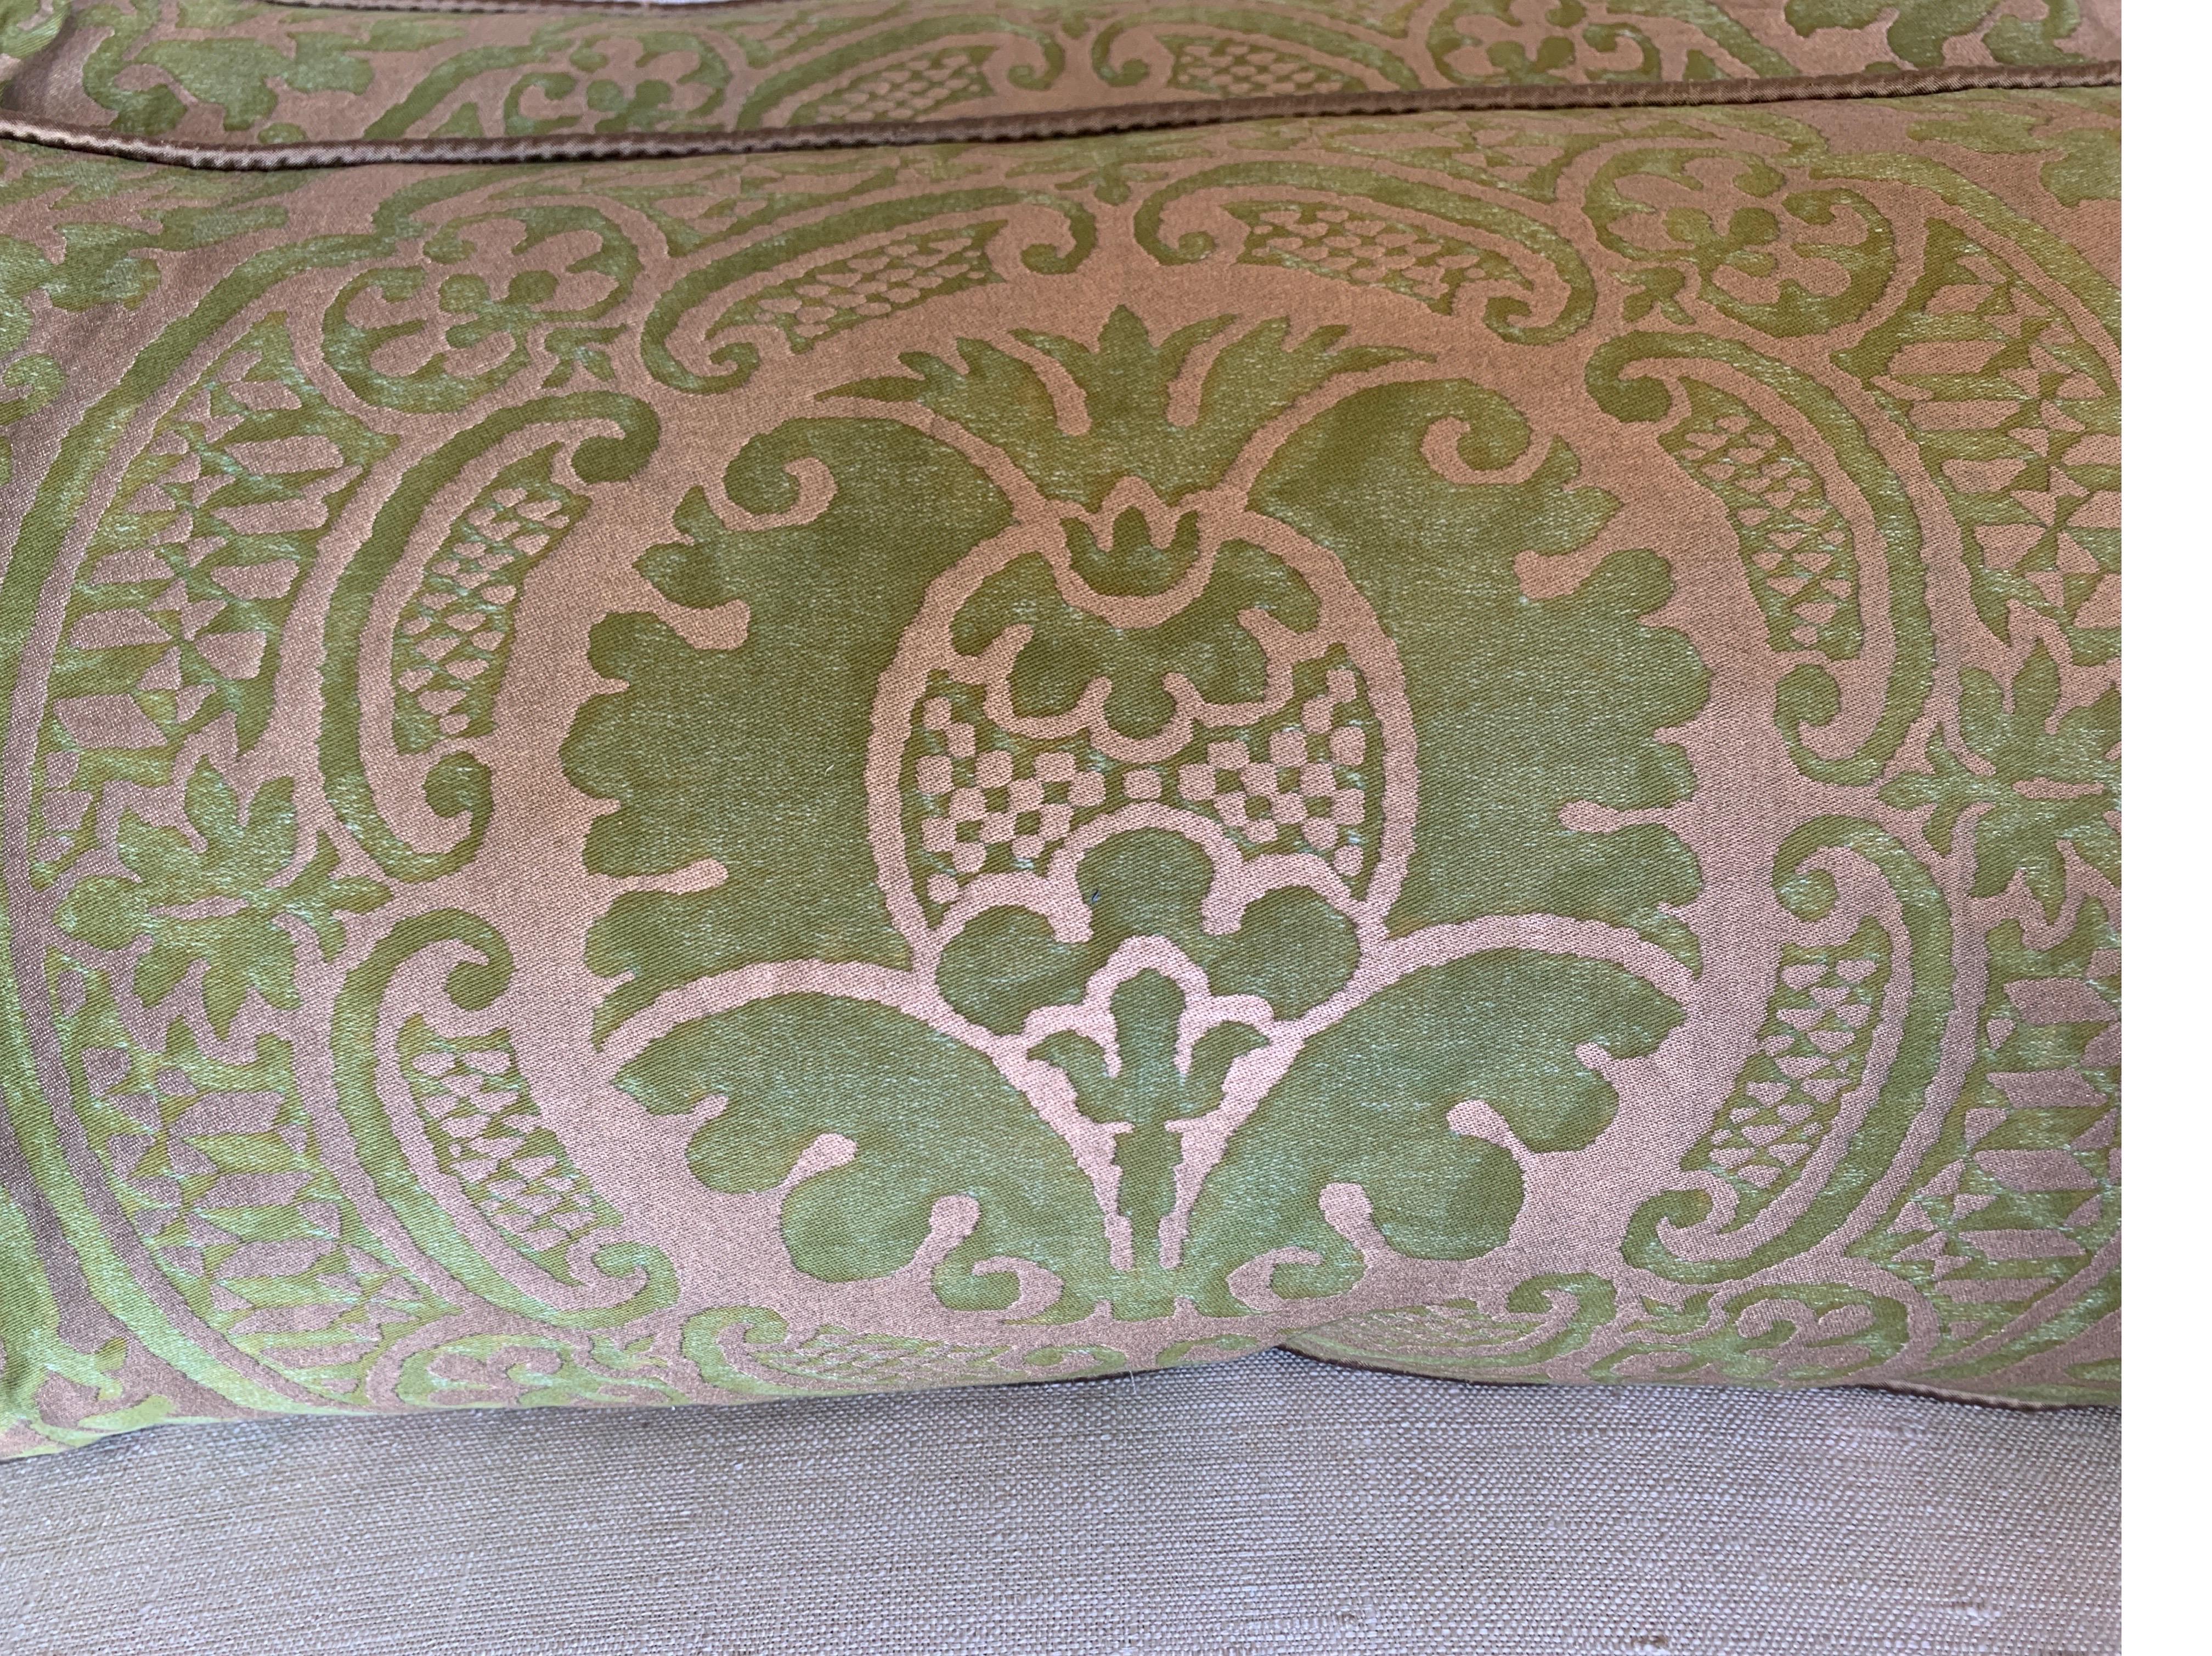 Pair of custom pillows made with Italian green and gold stenciled Fortuny fronts in the Orsini pattern and gold silk backs. Self cording, down filled inserts, sewn closed.